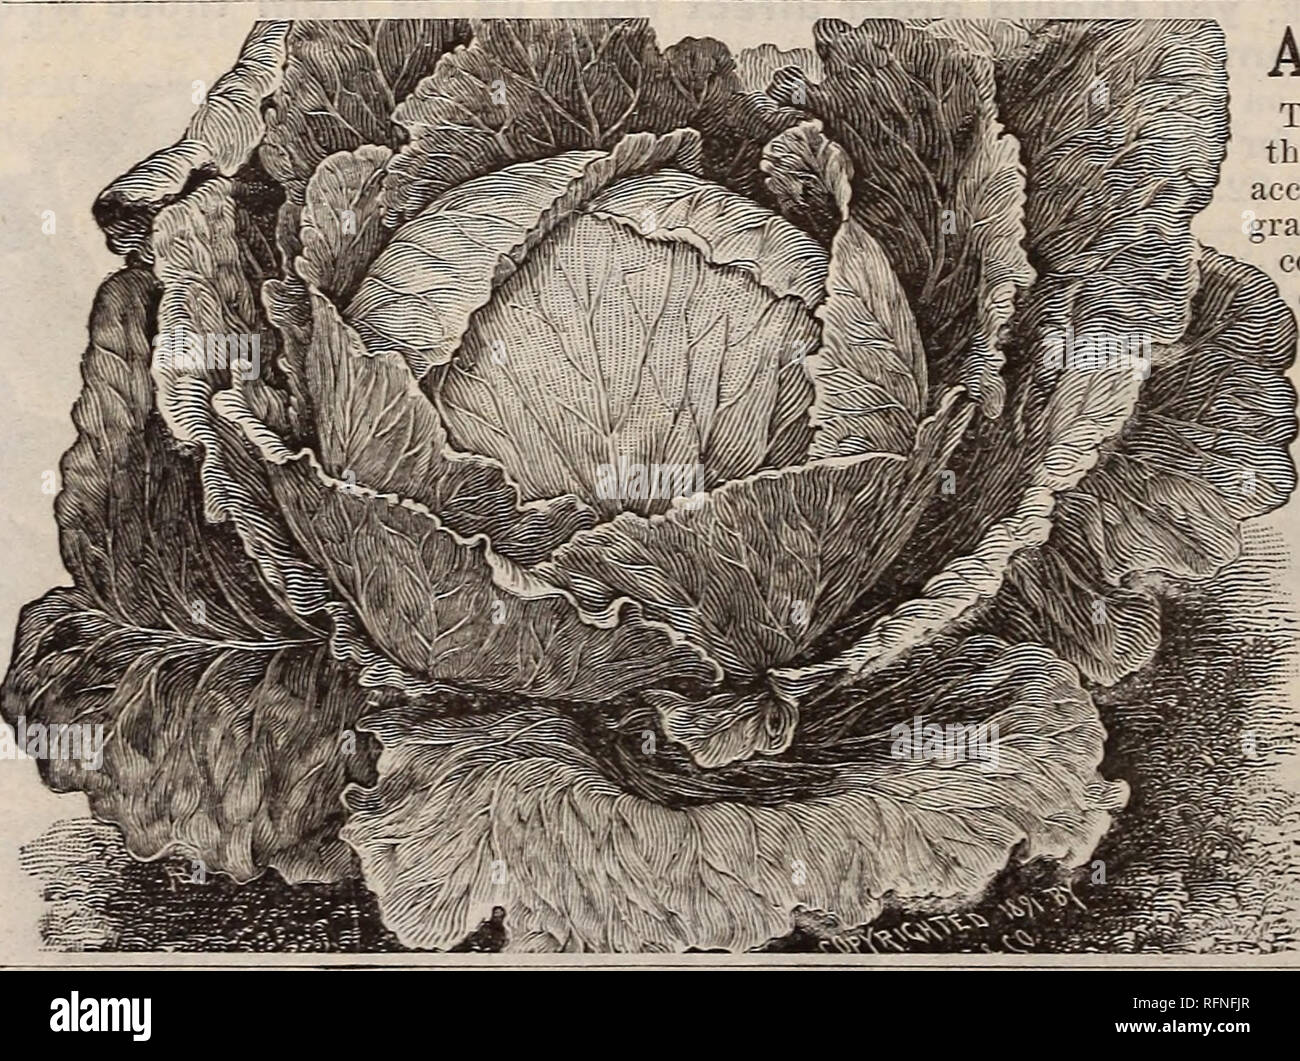 . Burpee's farm annual written at Fordhook Farm. Nurseries (Horticulture) Pennsylvania Philadelphia Catalogs; Vegetables Seeds Catalogs; Plants, Ornamental Catalogs; Flowers Seeds Catalogs. FOTTLER'S EARLY DRUMHEAD, OR SHORT=STEM BRUNSWICK CABBAGE. This is a first-class second-early Drumhead Cabbage. Very solid heads, of medium size, and light bluish-green in color; of close habit of growth, stem very short, the plant heading close to the ground, heads are thick, but decidedly flat, earlier than the Flat Dutch, or other late Cabbages, but not so early as Early Summer. A very good Cabbage as an Stock Photo